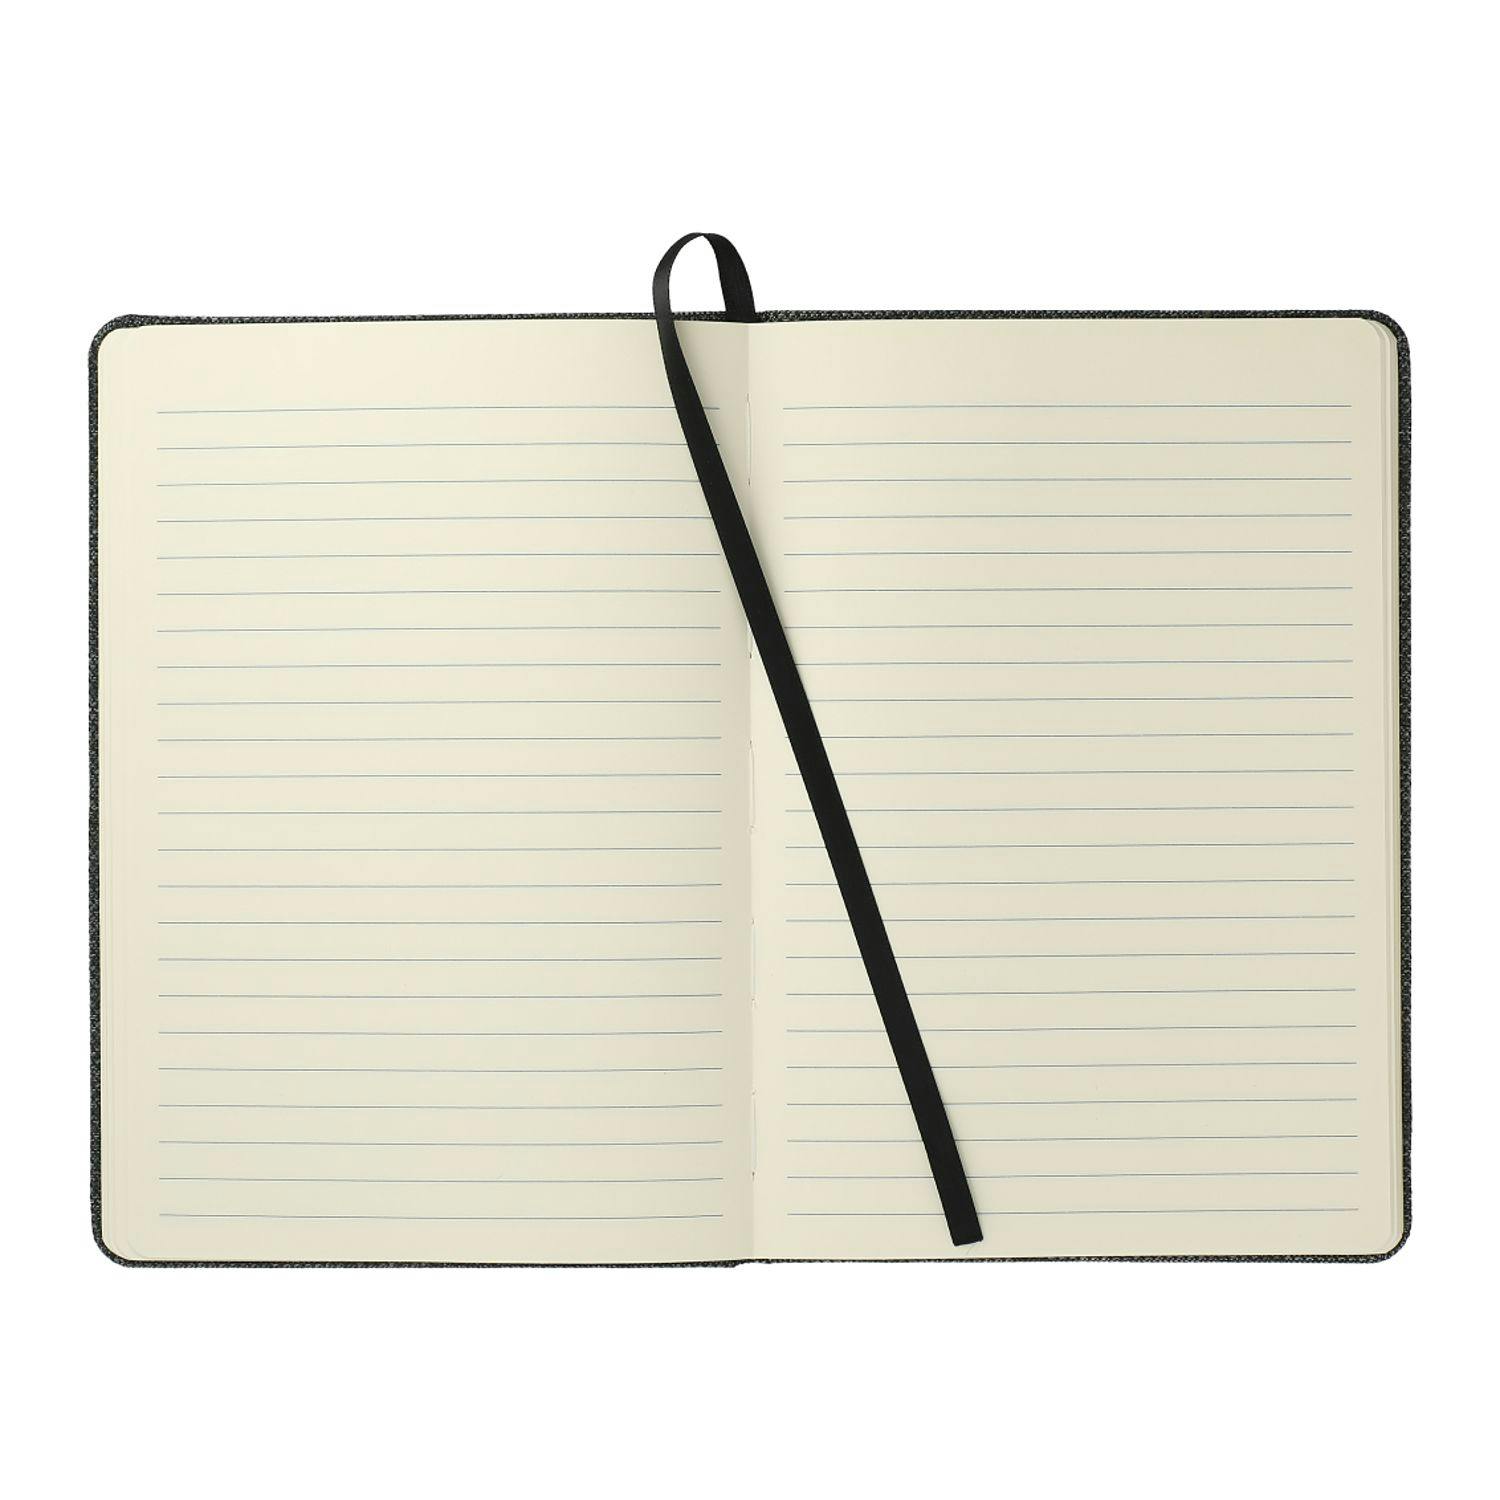 5.5” x 8.5” Vila Recycled PET Bound Notebook - additional Image 3